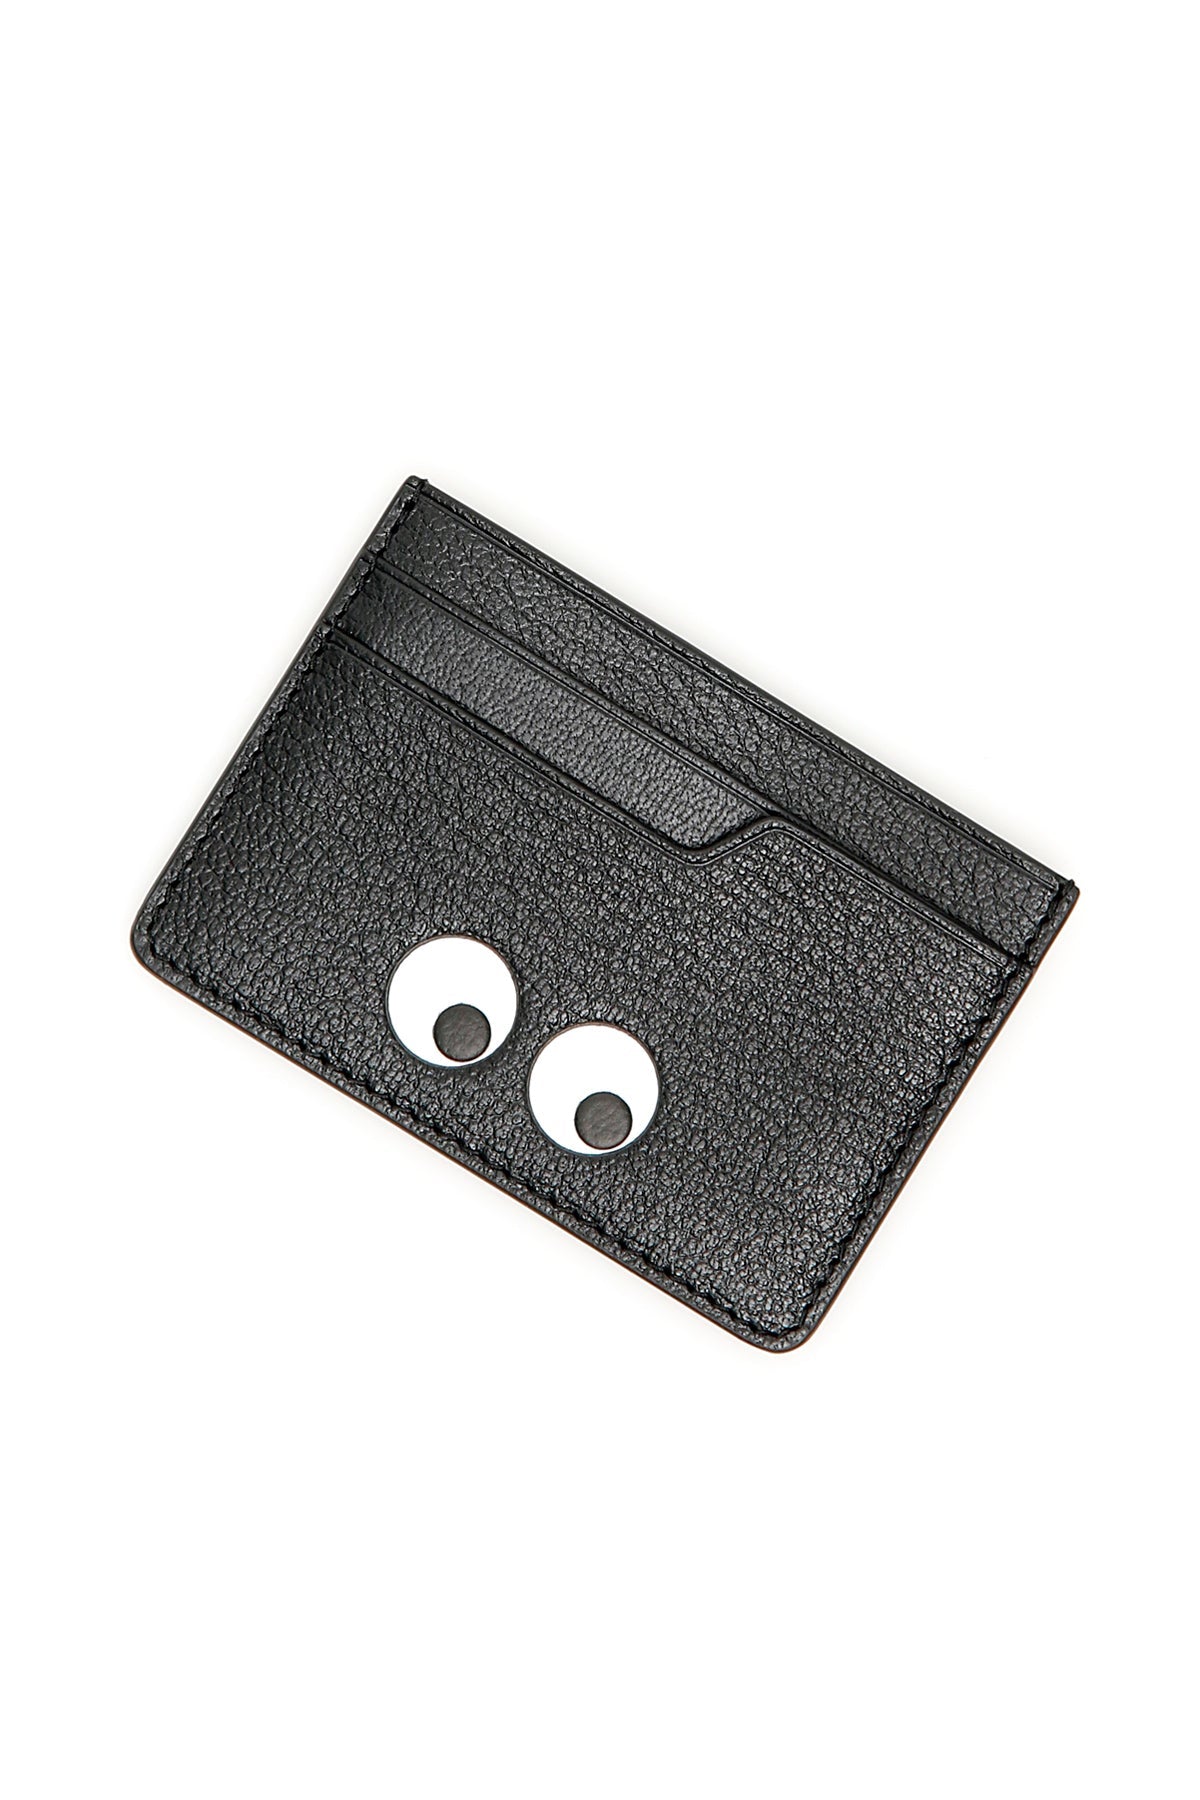 Eyes Cardholder-women > accessories > wallets and small leather goods > card holders-Anya Hindmarch-os-Nero-Urbanheer